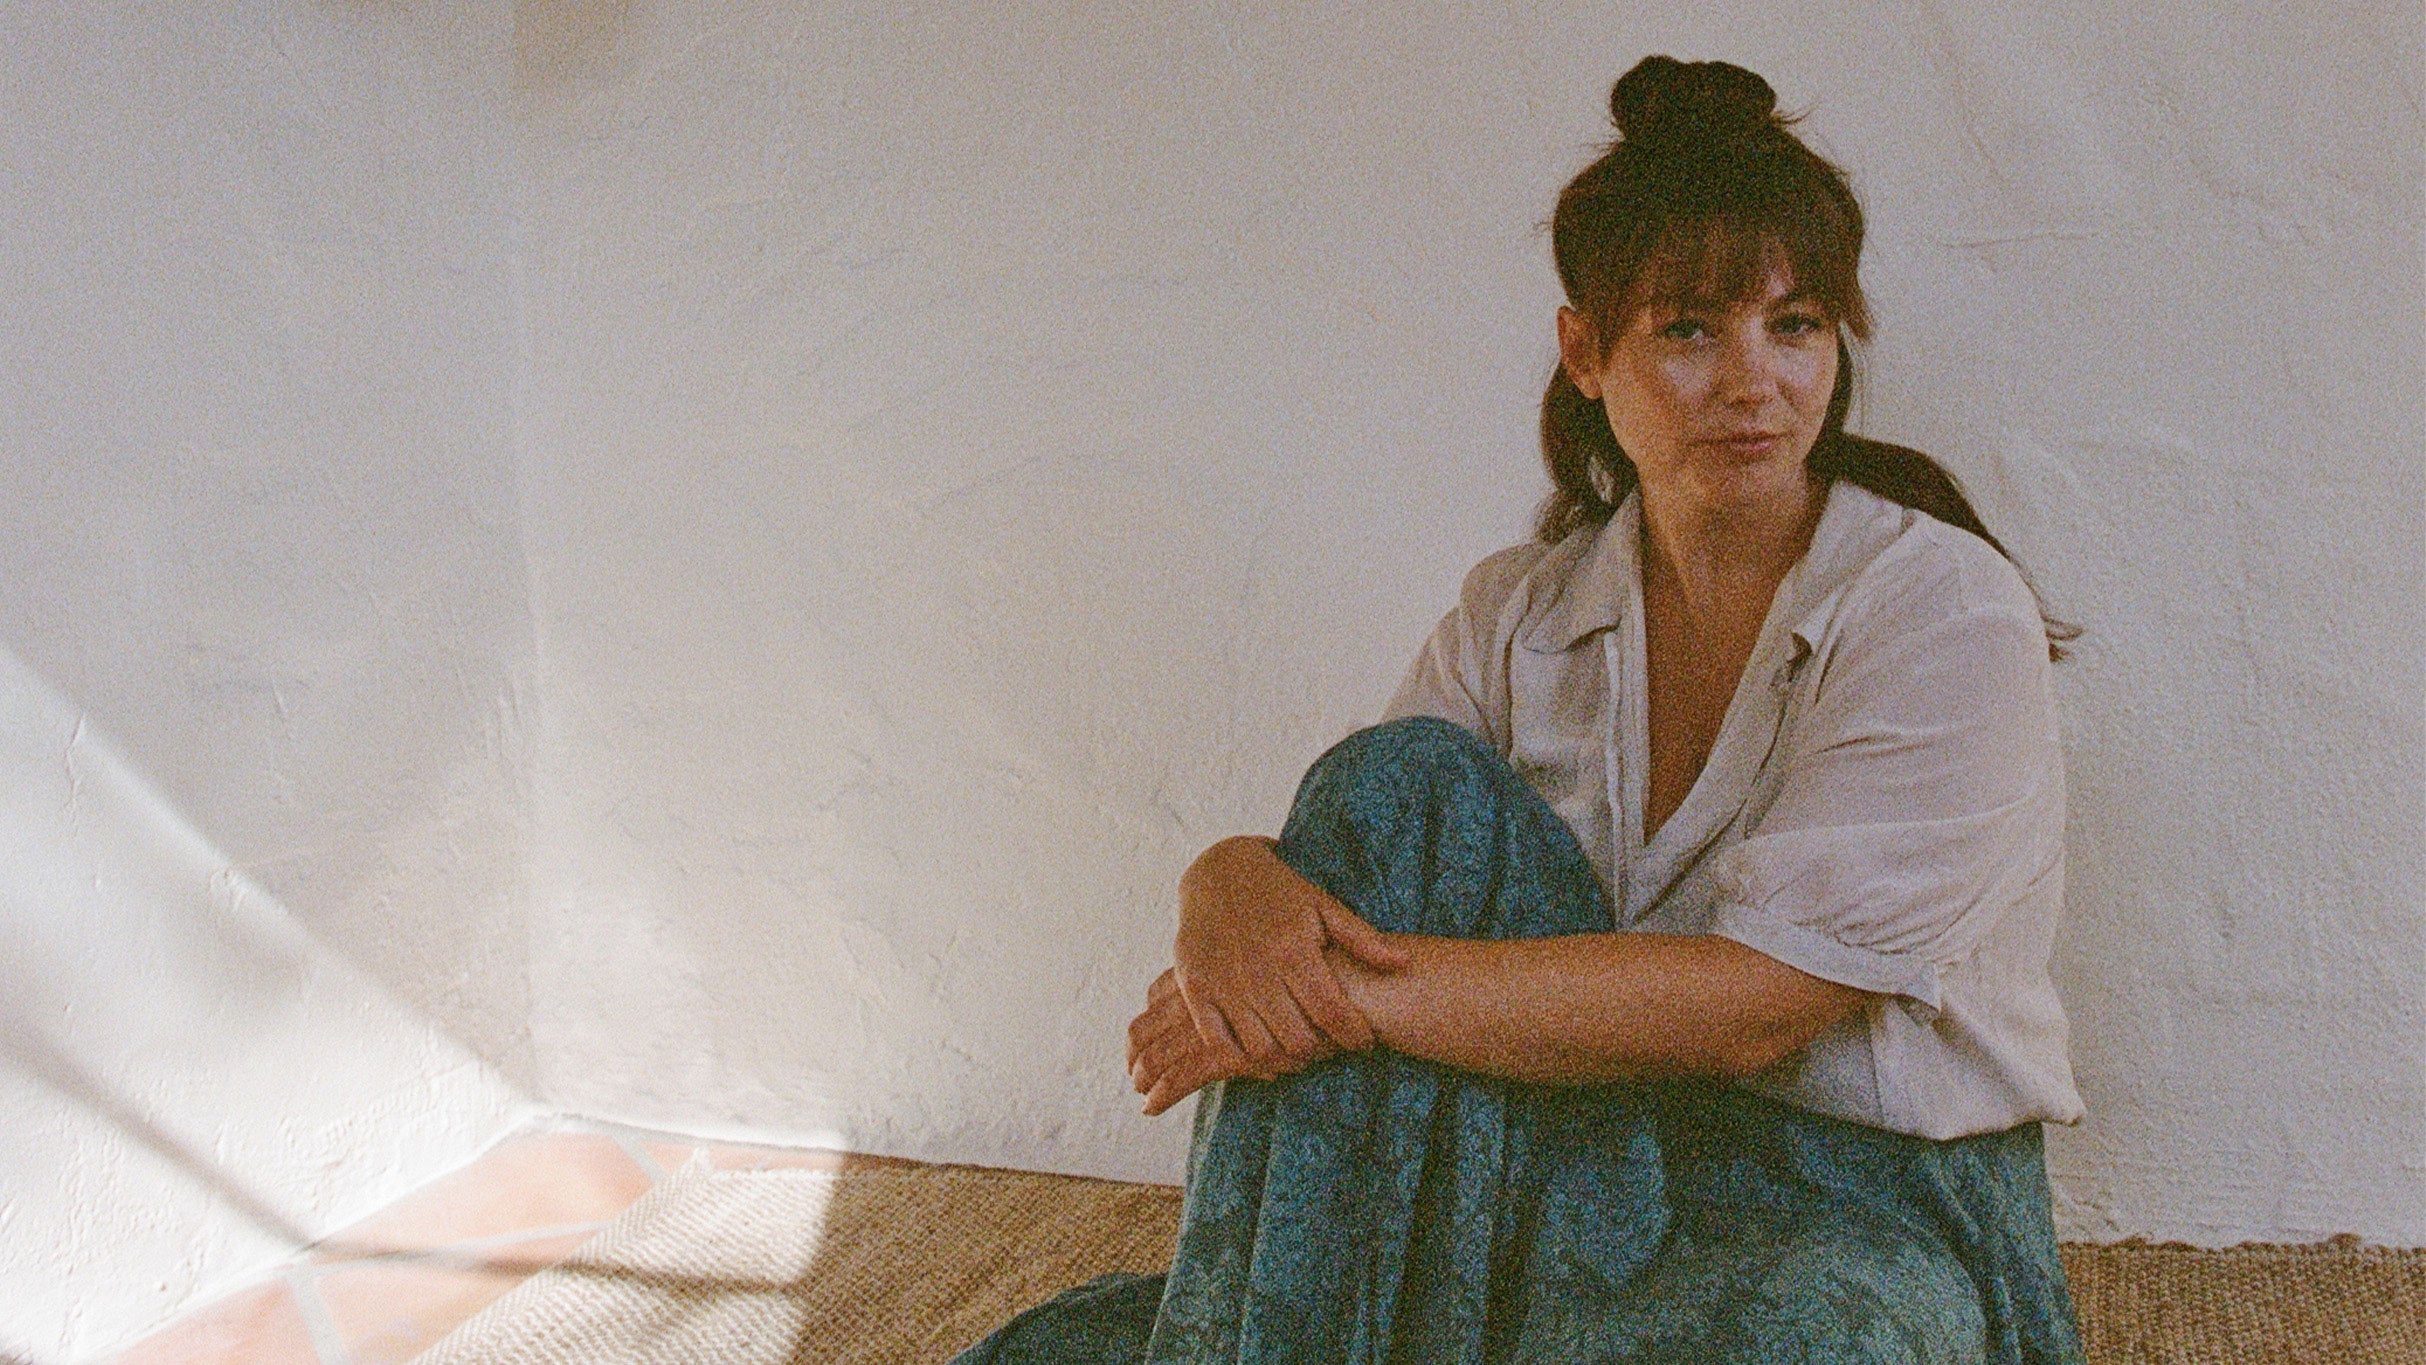 Angel Olsen (Solo): Songs From The Archive in Red Bank promo photo for Artist presale offer code